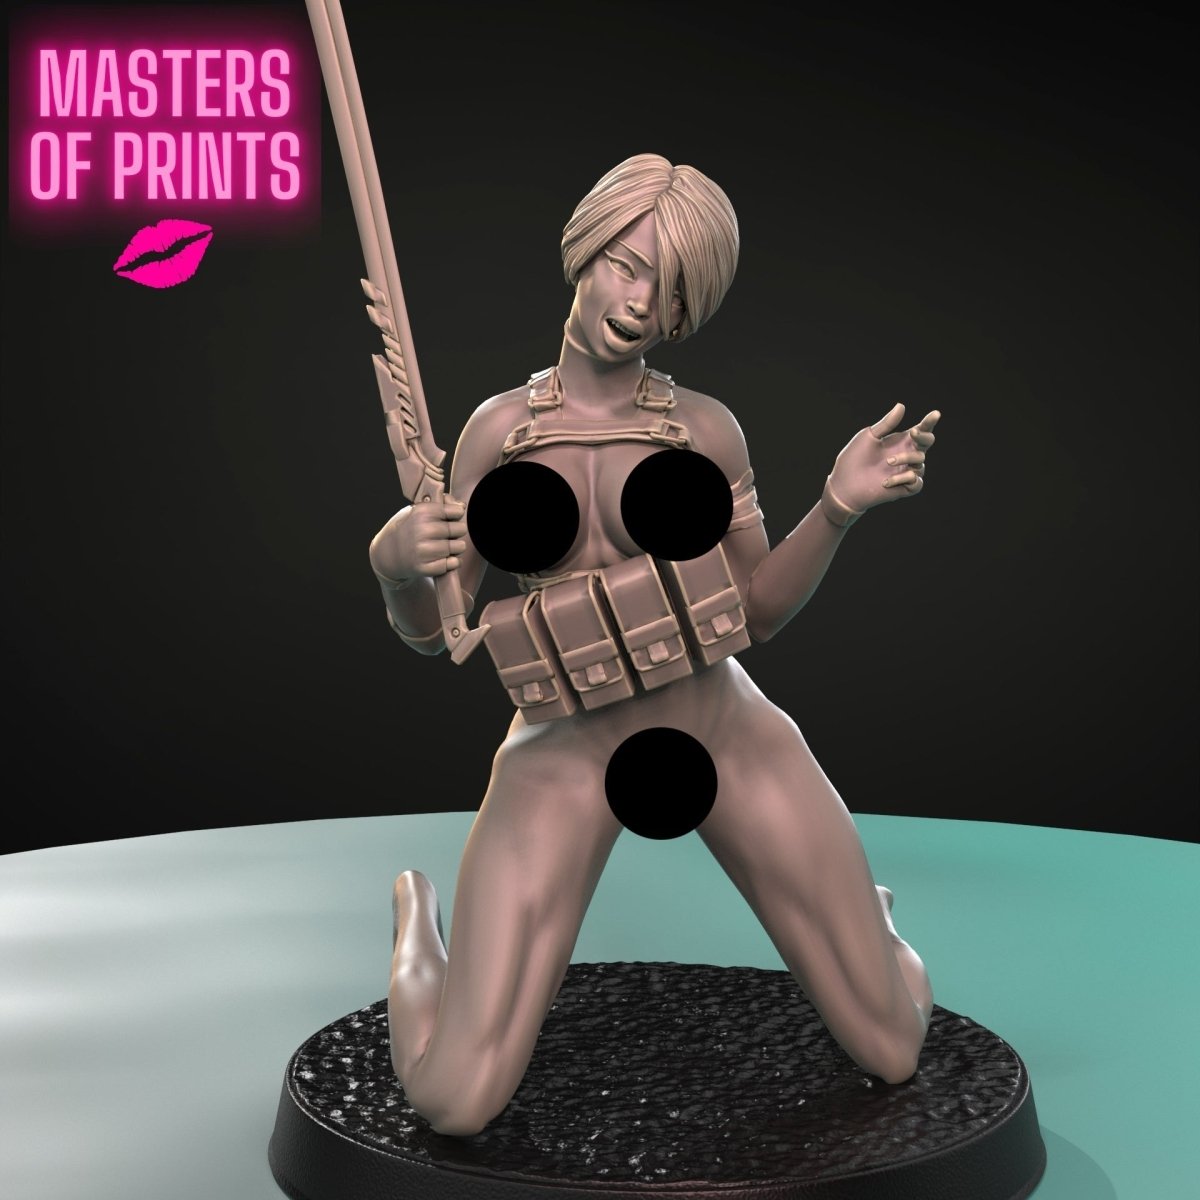 DANGEROUS MOLLY 2 Sexy Naked 3d Printed Miniature FanArt Resin Unpainted Figure